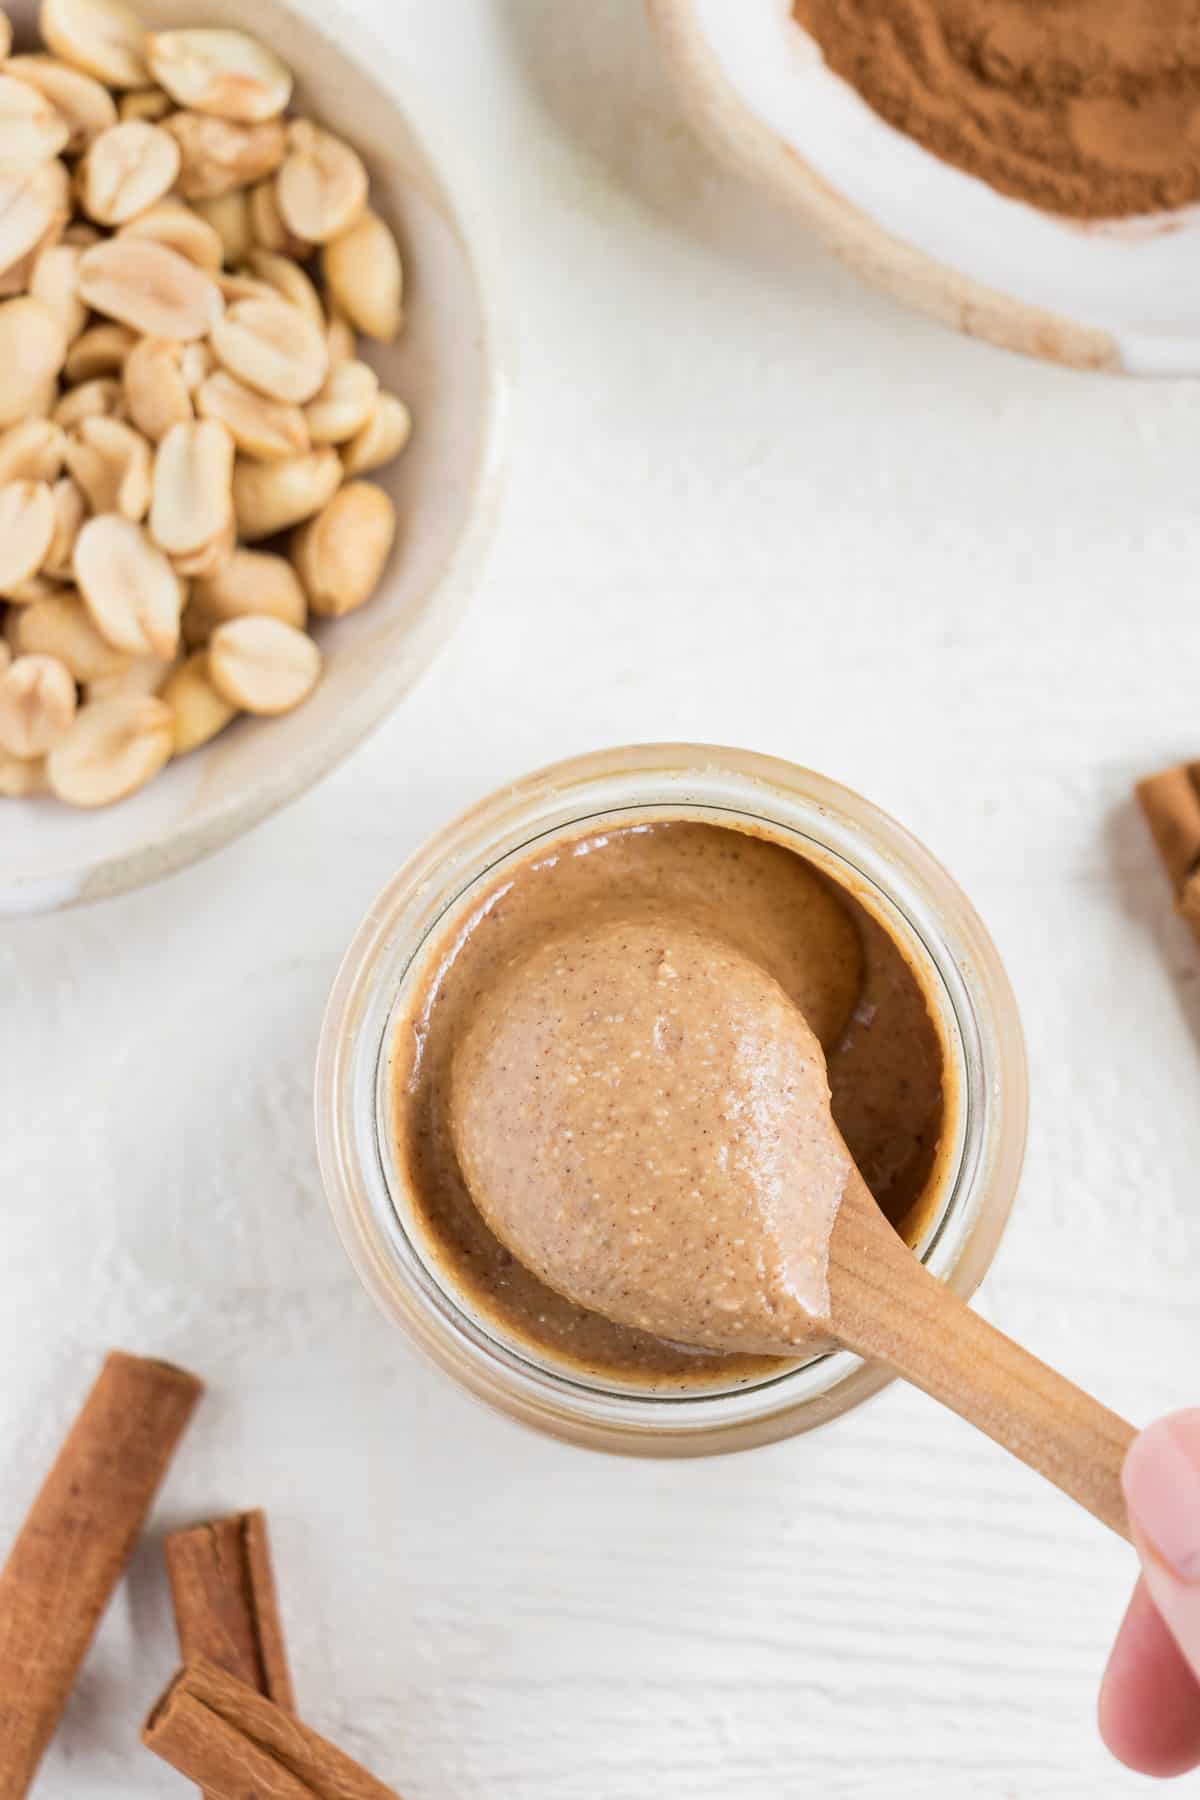 wooden spoon scooping nut butter out of a glass jar